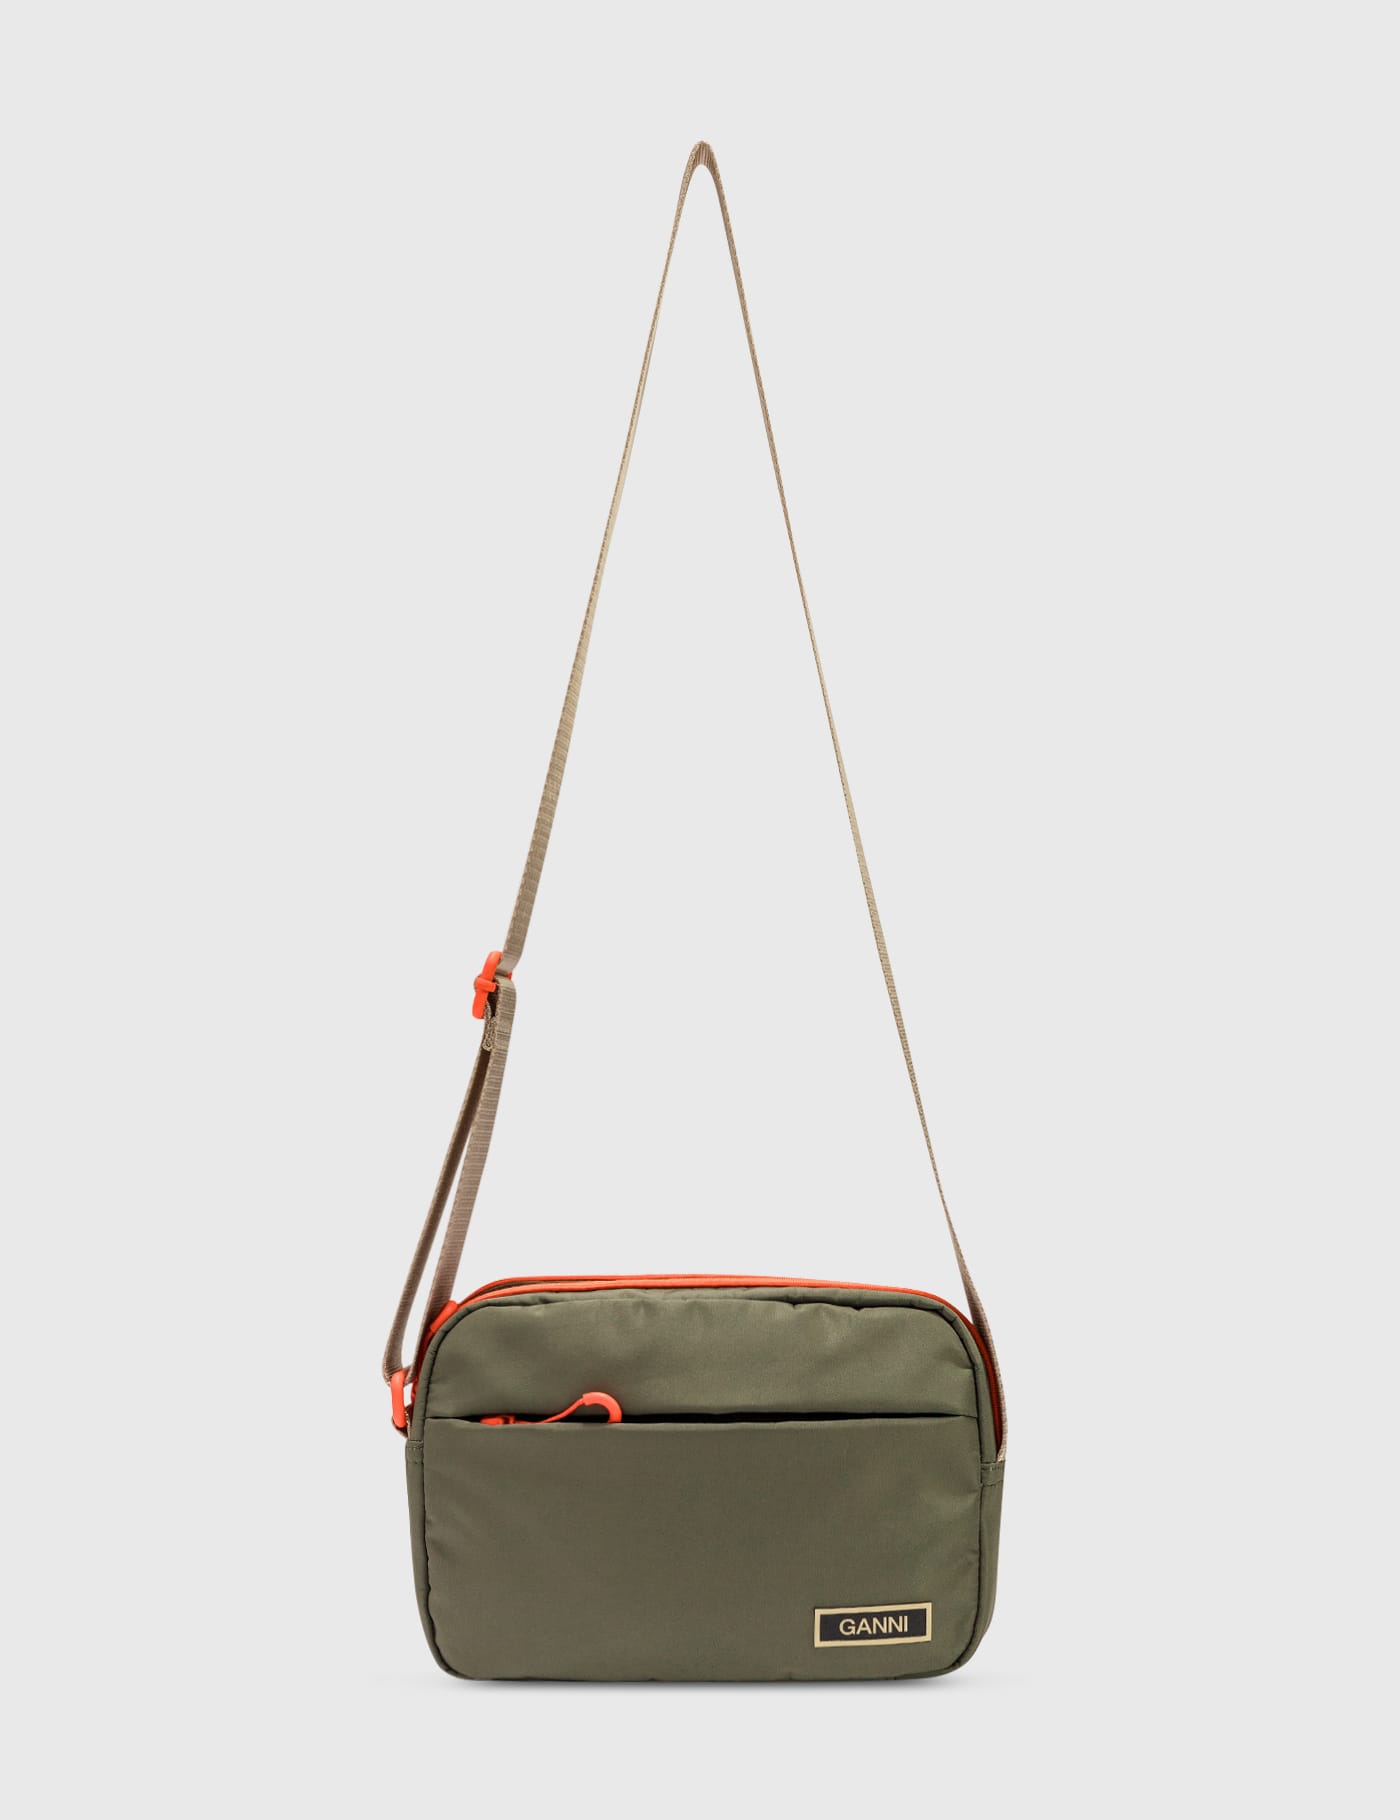 Ganni - Seasonal Recycled Tech Crossbody Bag | HBX - Globally Curated  Fashion and Lifestyle by Hypebeast